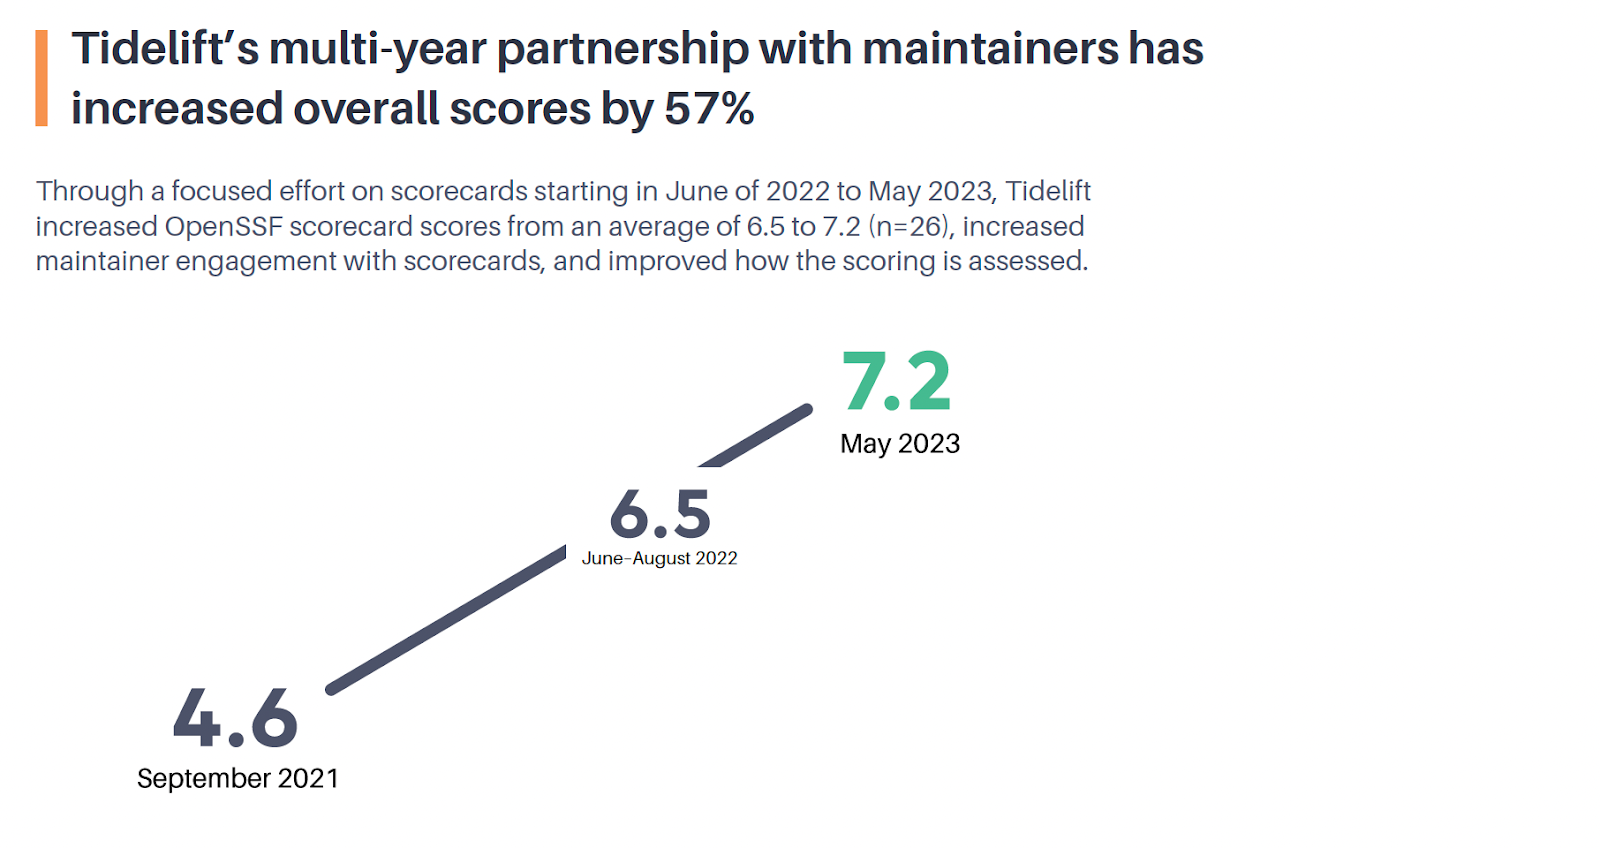 Tidelift's multi-year partnership with maintainers has increased overall scores by 57%